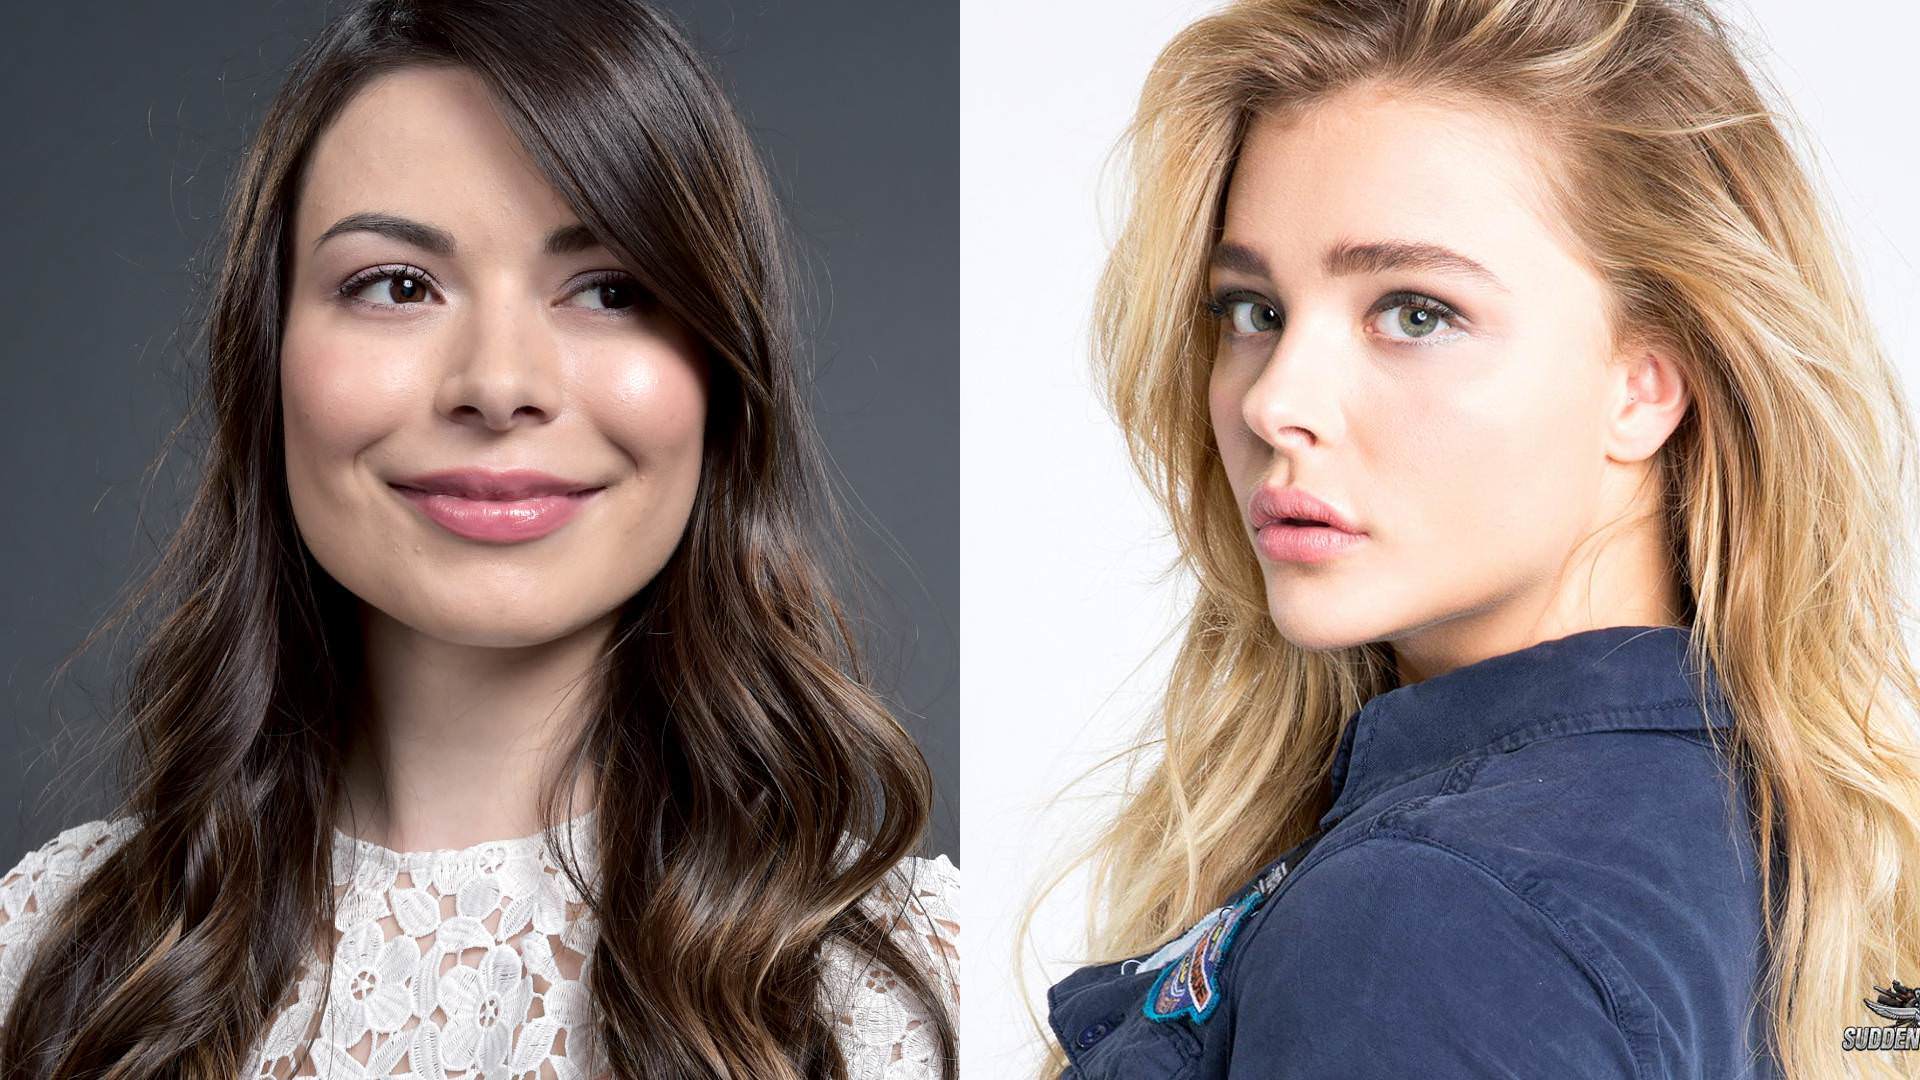 Imagine You Doing A Photoshoot With Miranda Cosgrove And Chloe Grace Moretz And After The 